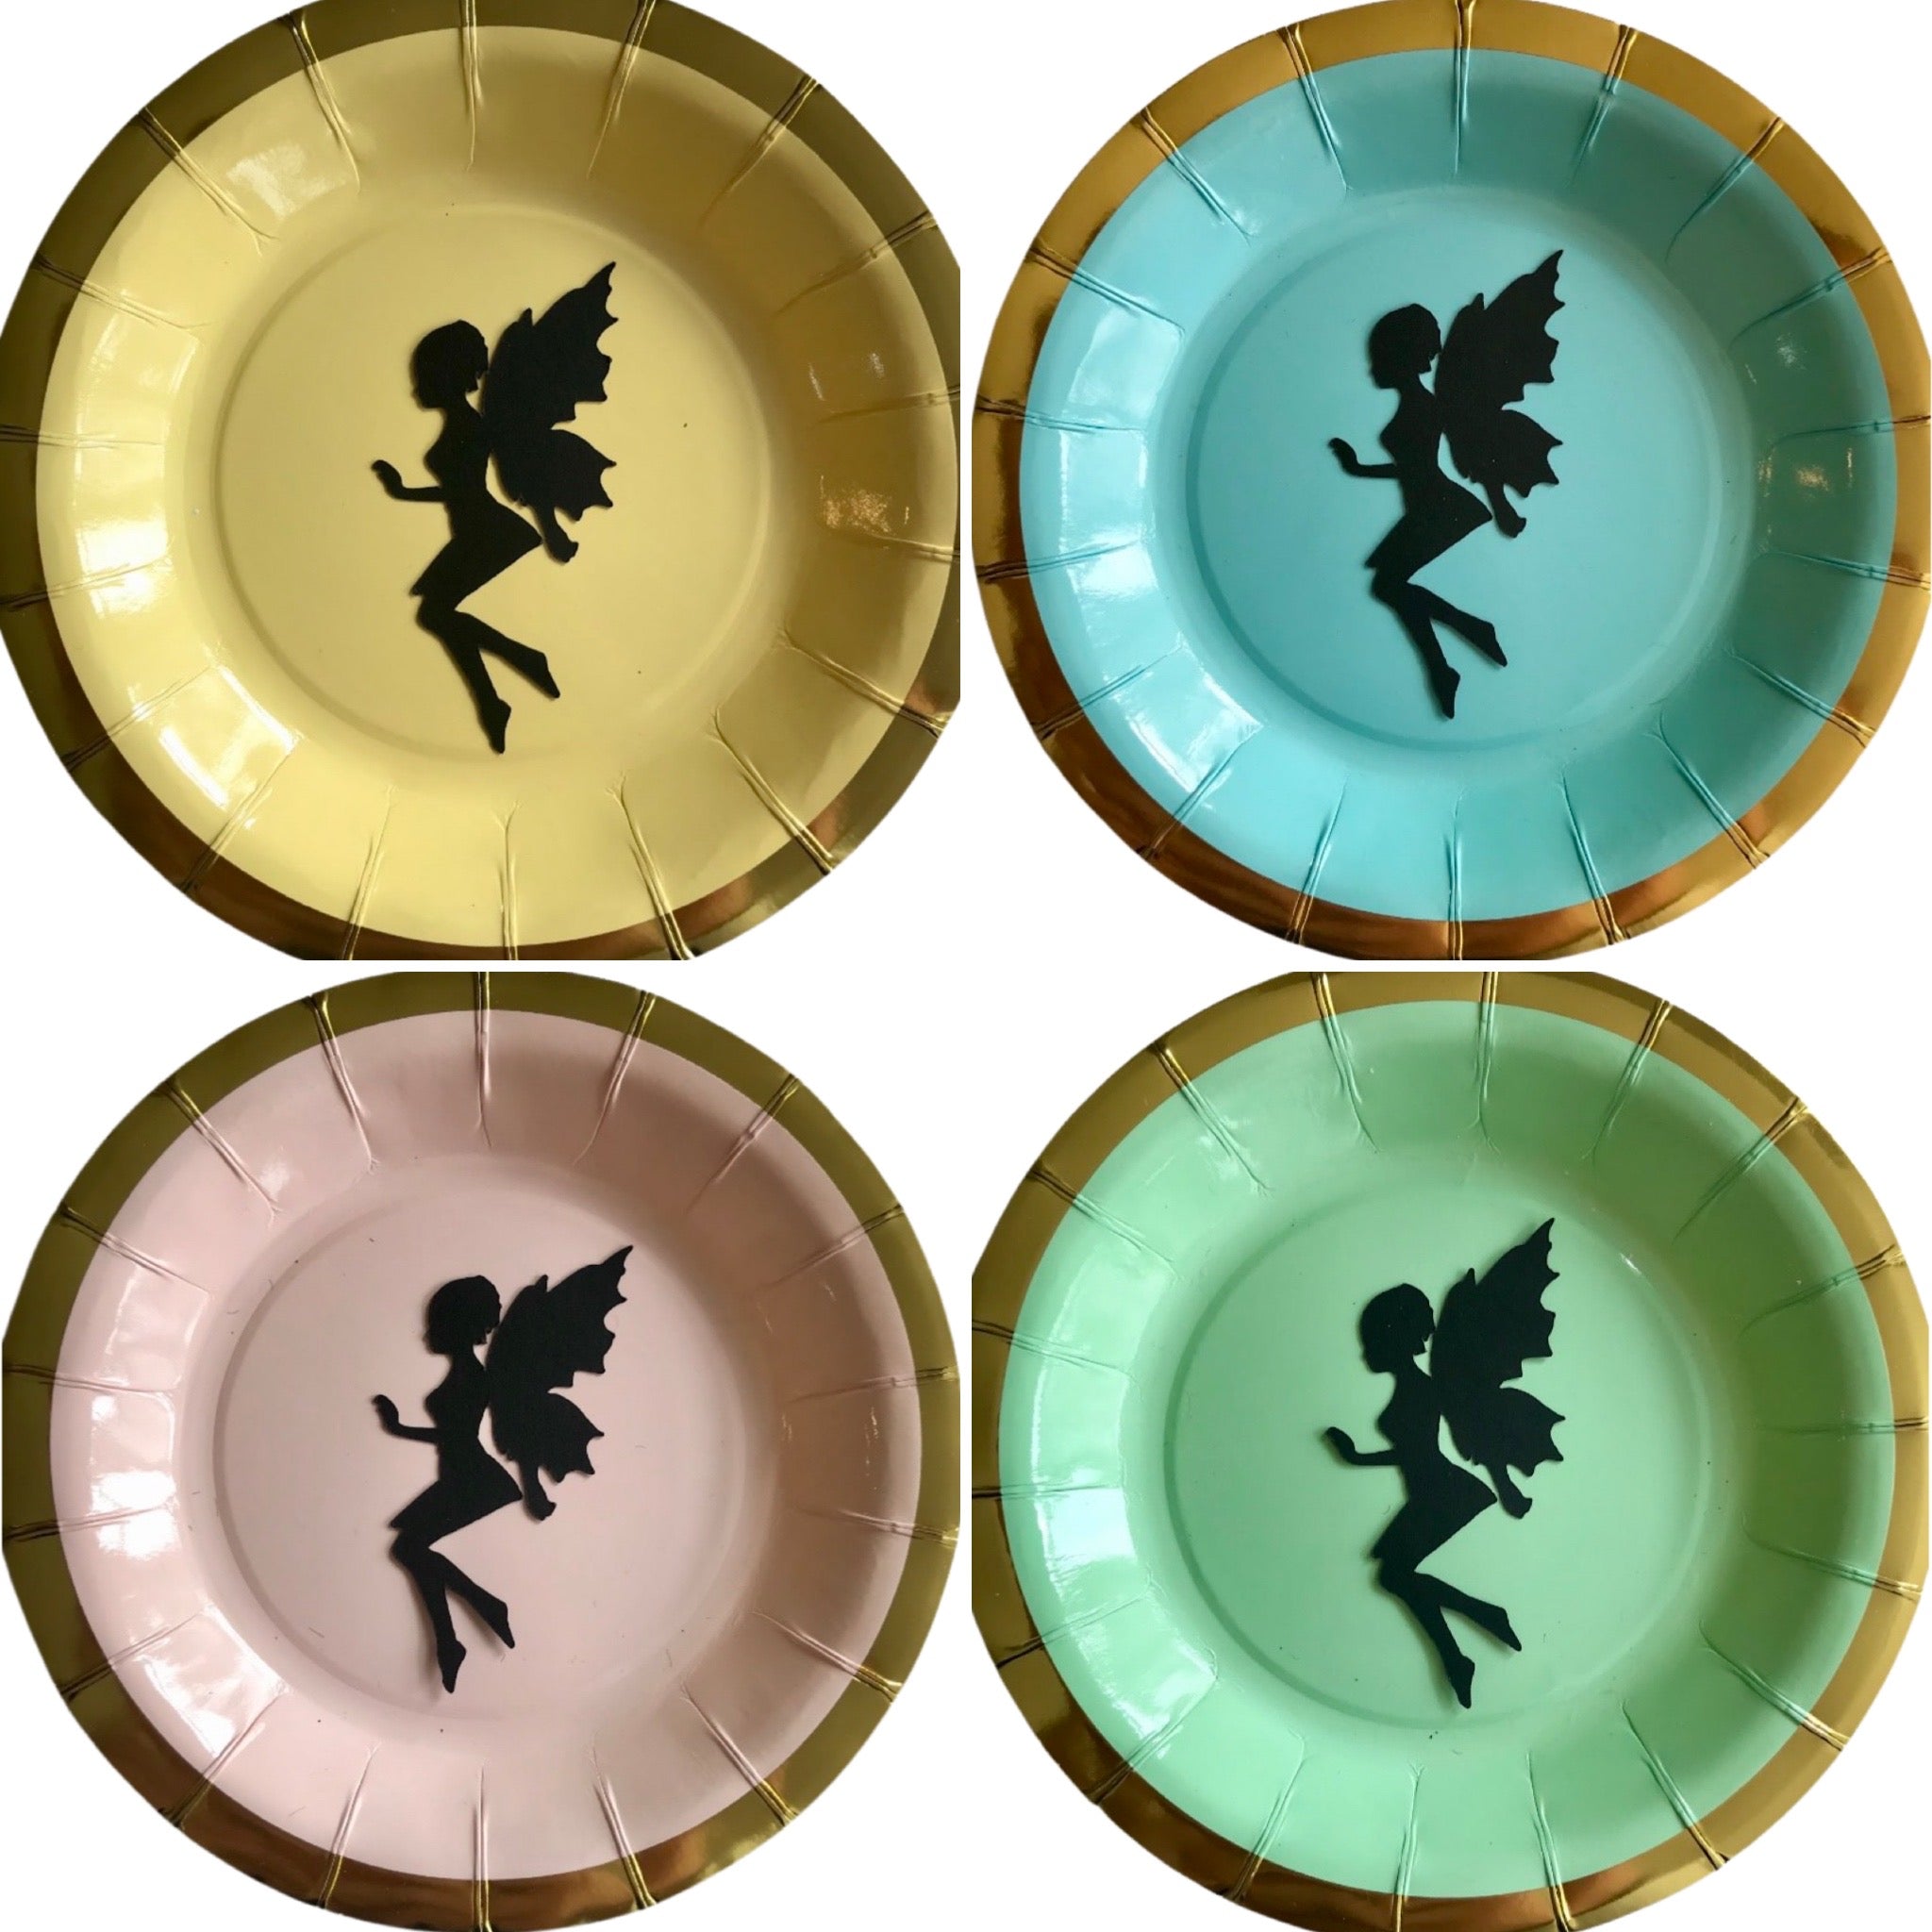 Fairy party plates